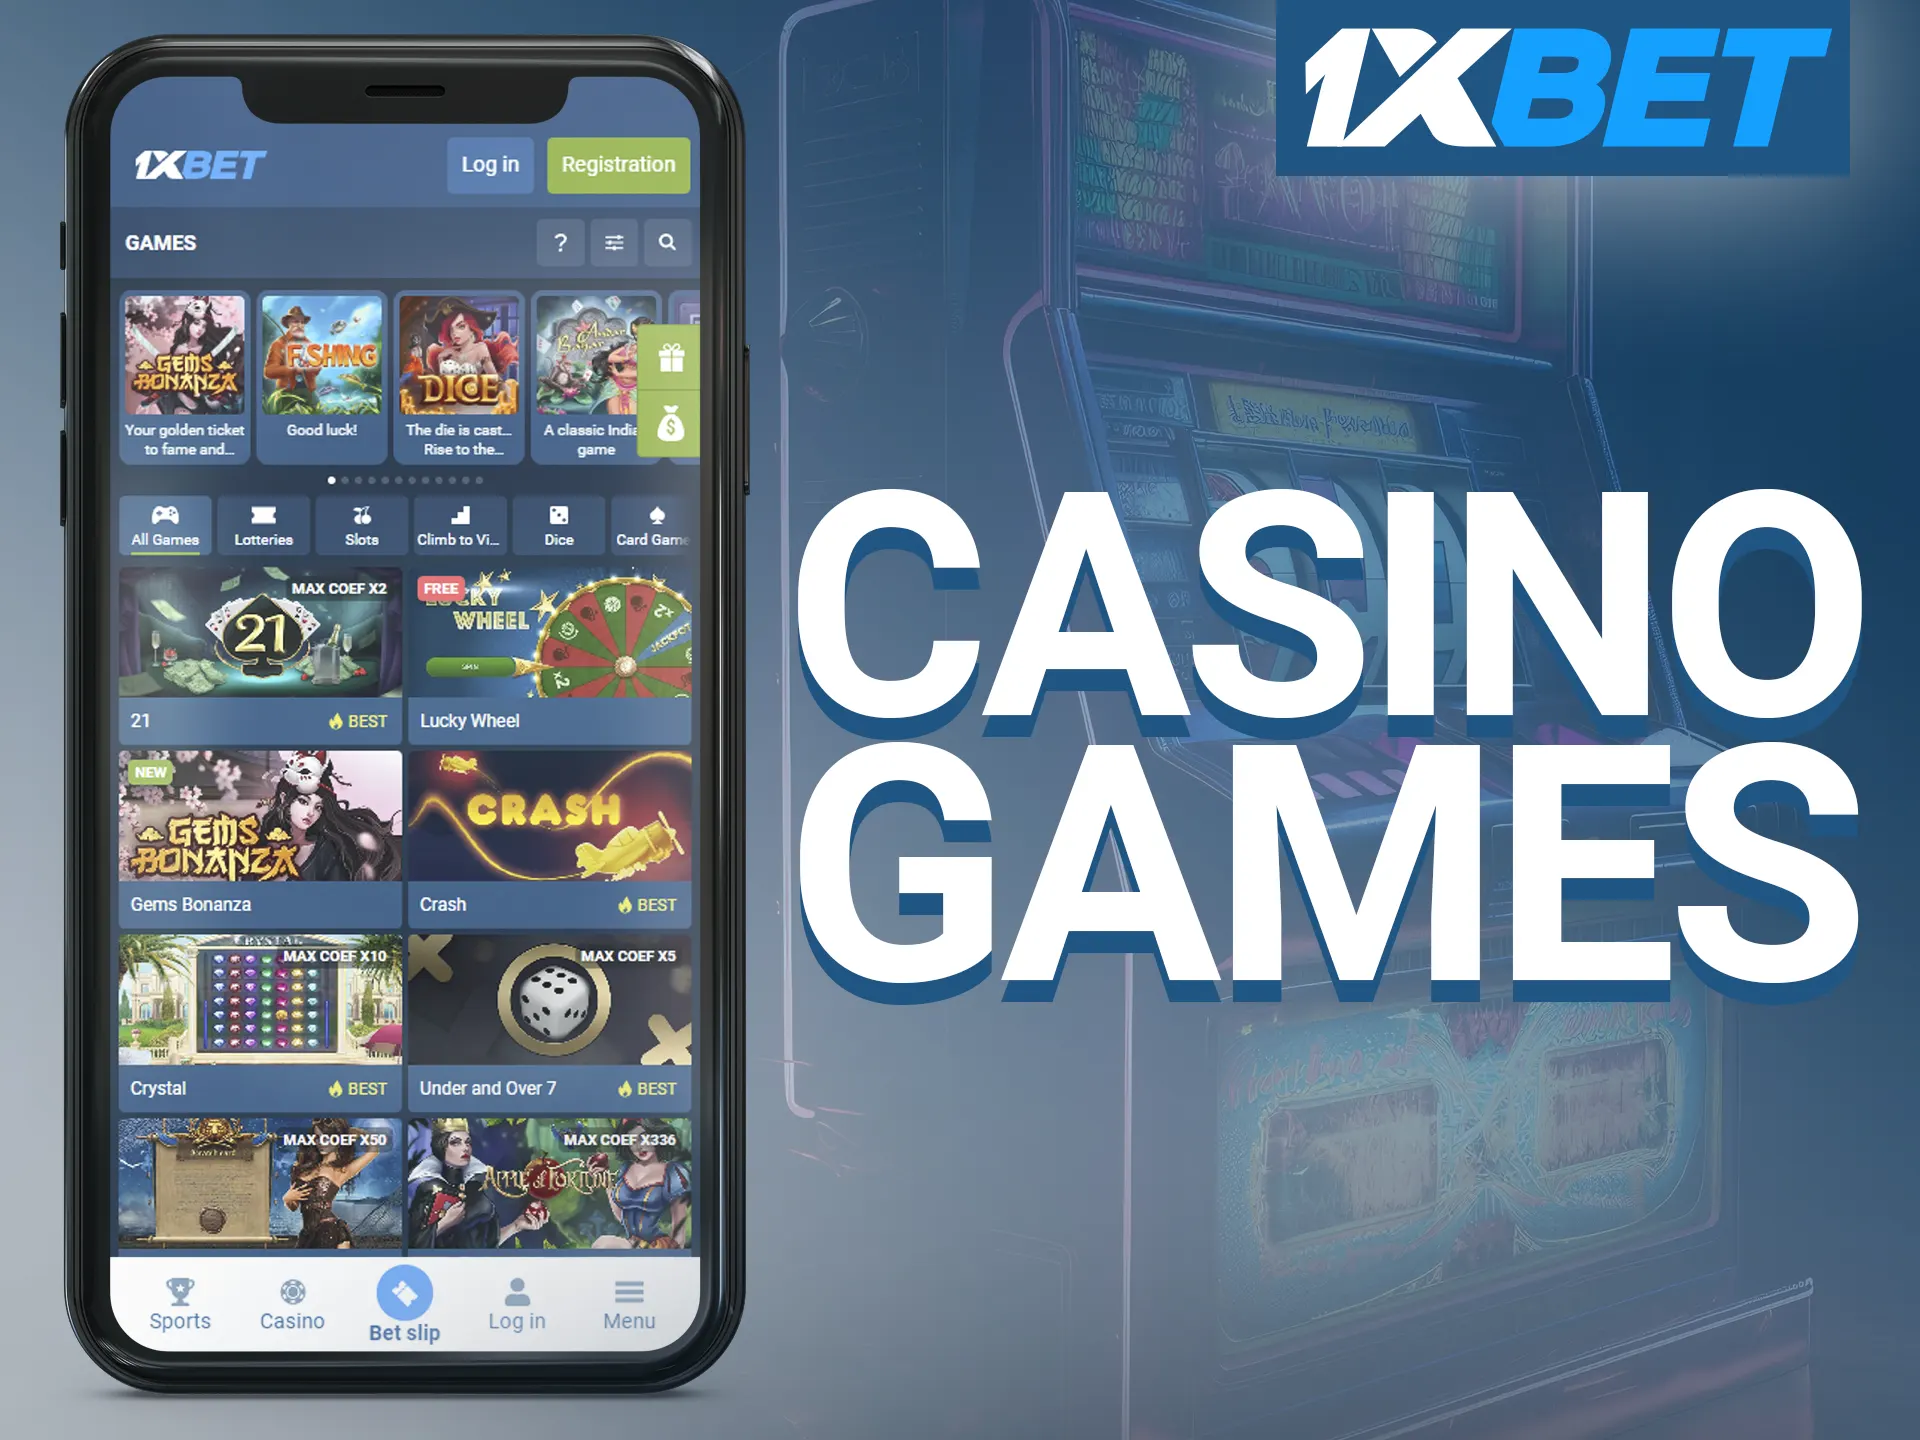 1xBet app offers a wide range of casino games to players.